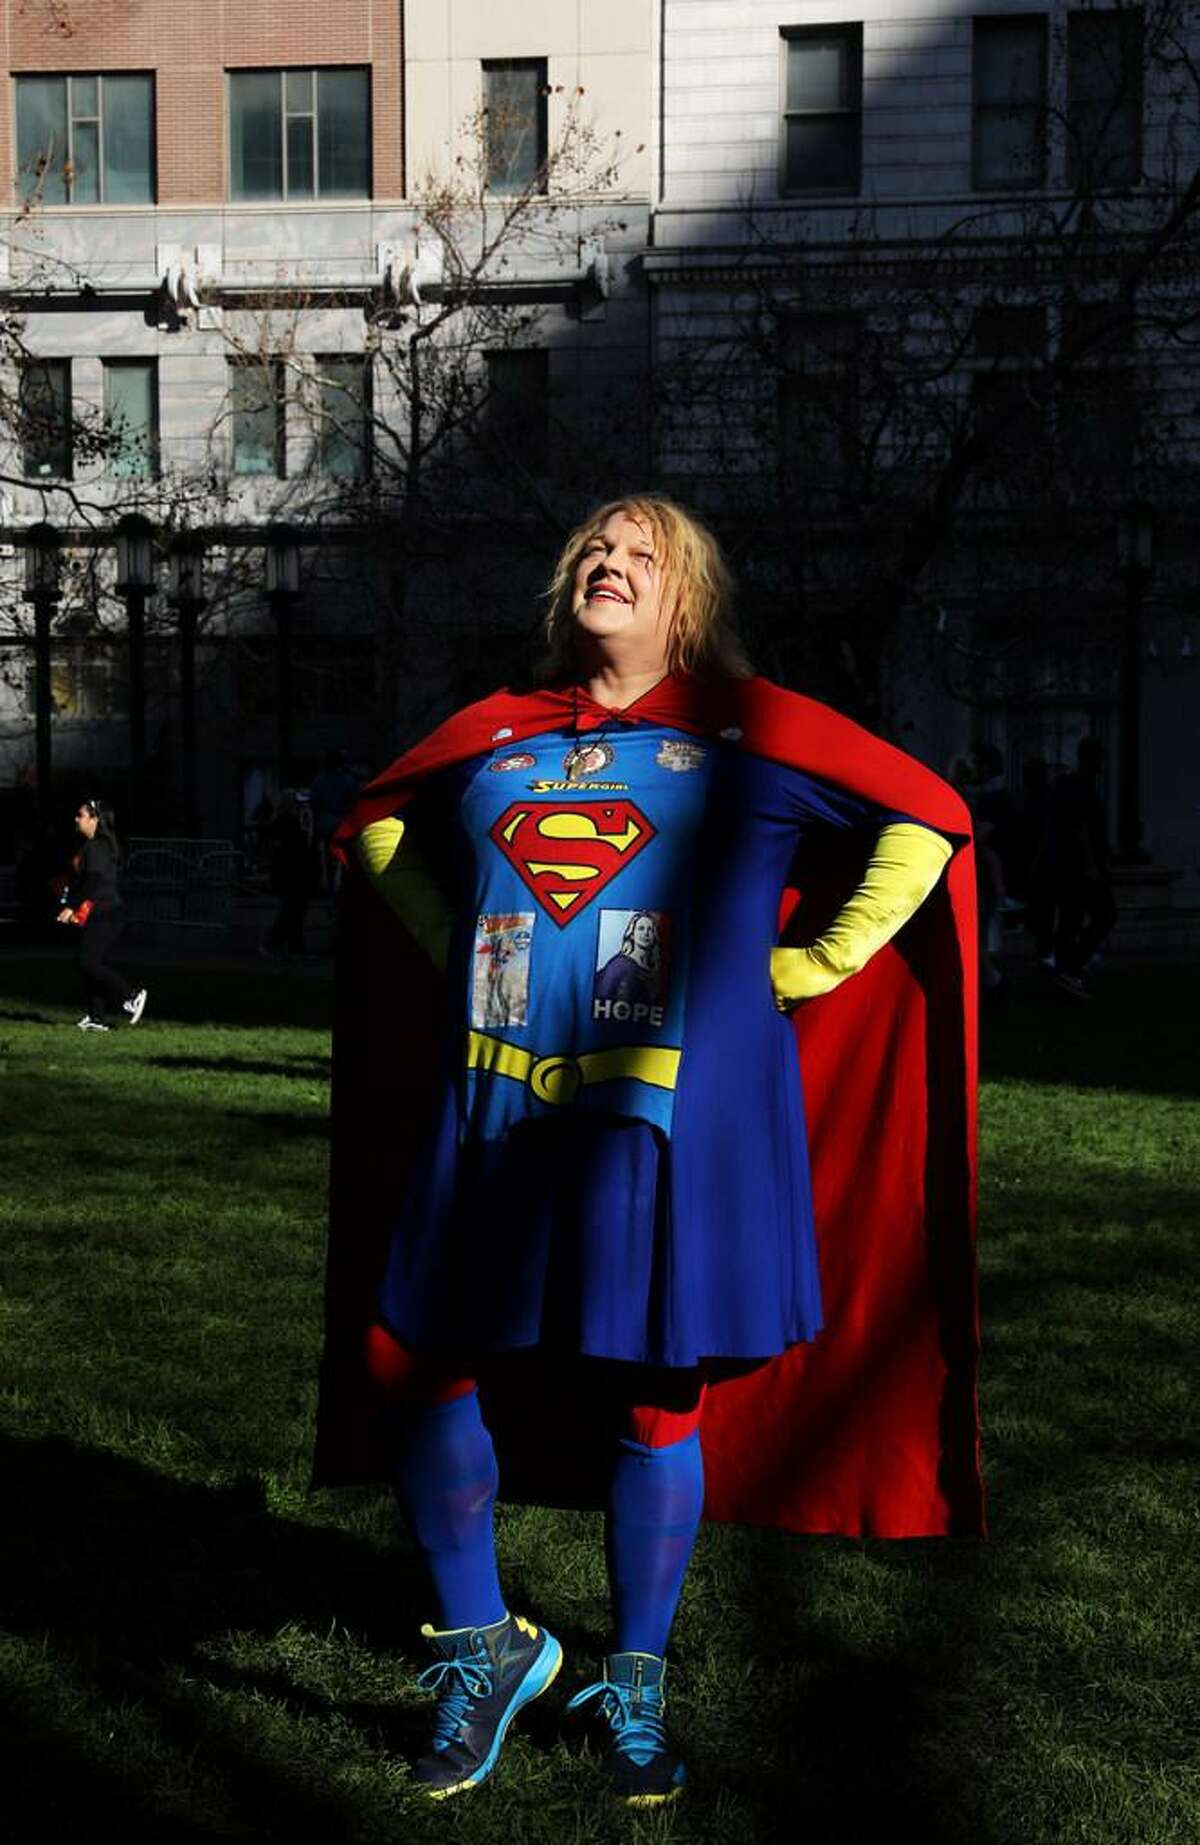 Shawn Sunshine Strickland, also known as Supergirl of San Francisco, poses for a portrait following Senator Kamala Harris's speech at the Frank Ogawa Plaza in Oakland, Calif., on Sunday, January 27, 2019. Harris officially launched her presidential campaign with a rally in her hometown of Oakland. "I heard her message of unity. She was calling for real unity like, she said, 'We can't have unity for the sake of unity. We have to call out the problems first,'" Strickland said. "That was so impressive to hear that. And she said 'We need to speak the real truth, actual truths,' and that's so important too 'cause there's so many groups trying to divide us and keep us apart and make us hate each other and distrust each other. I think she is the right candidate to bring us together."